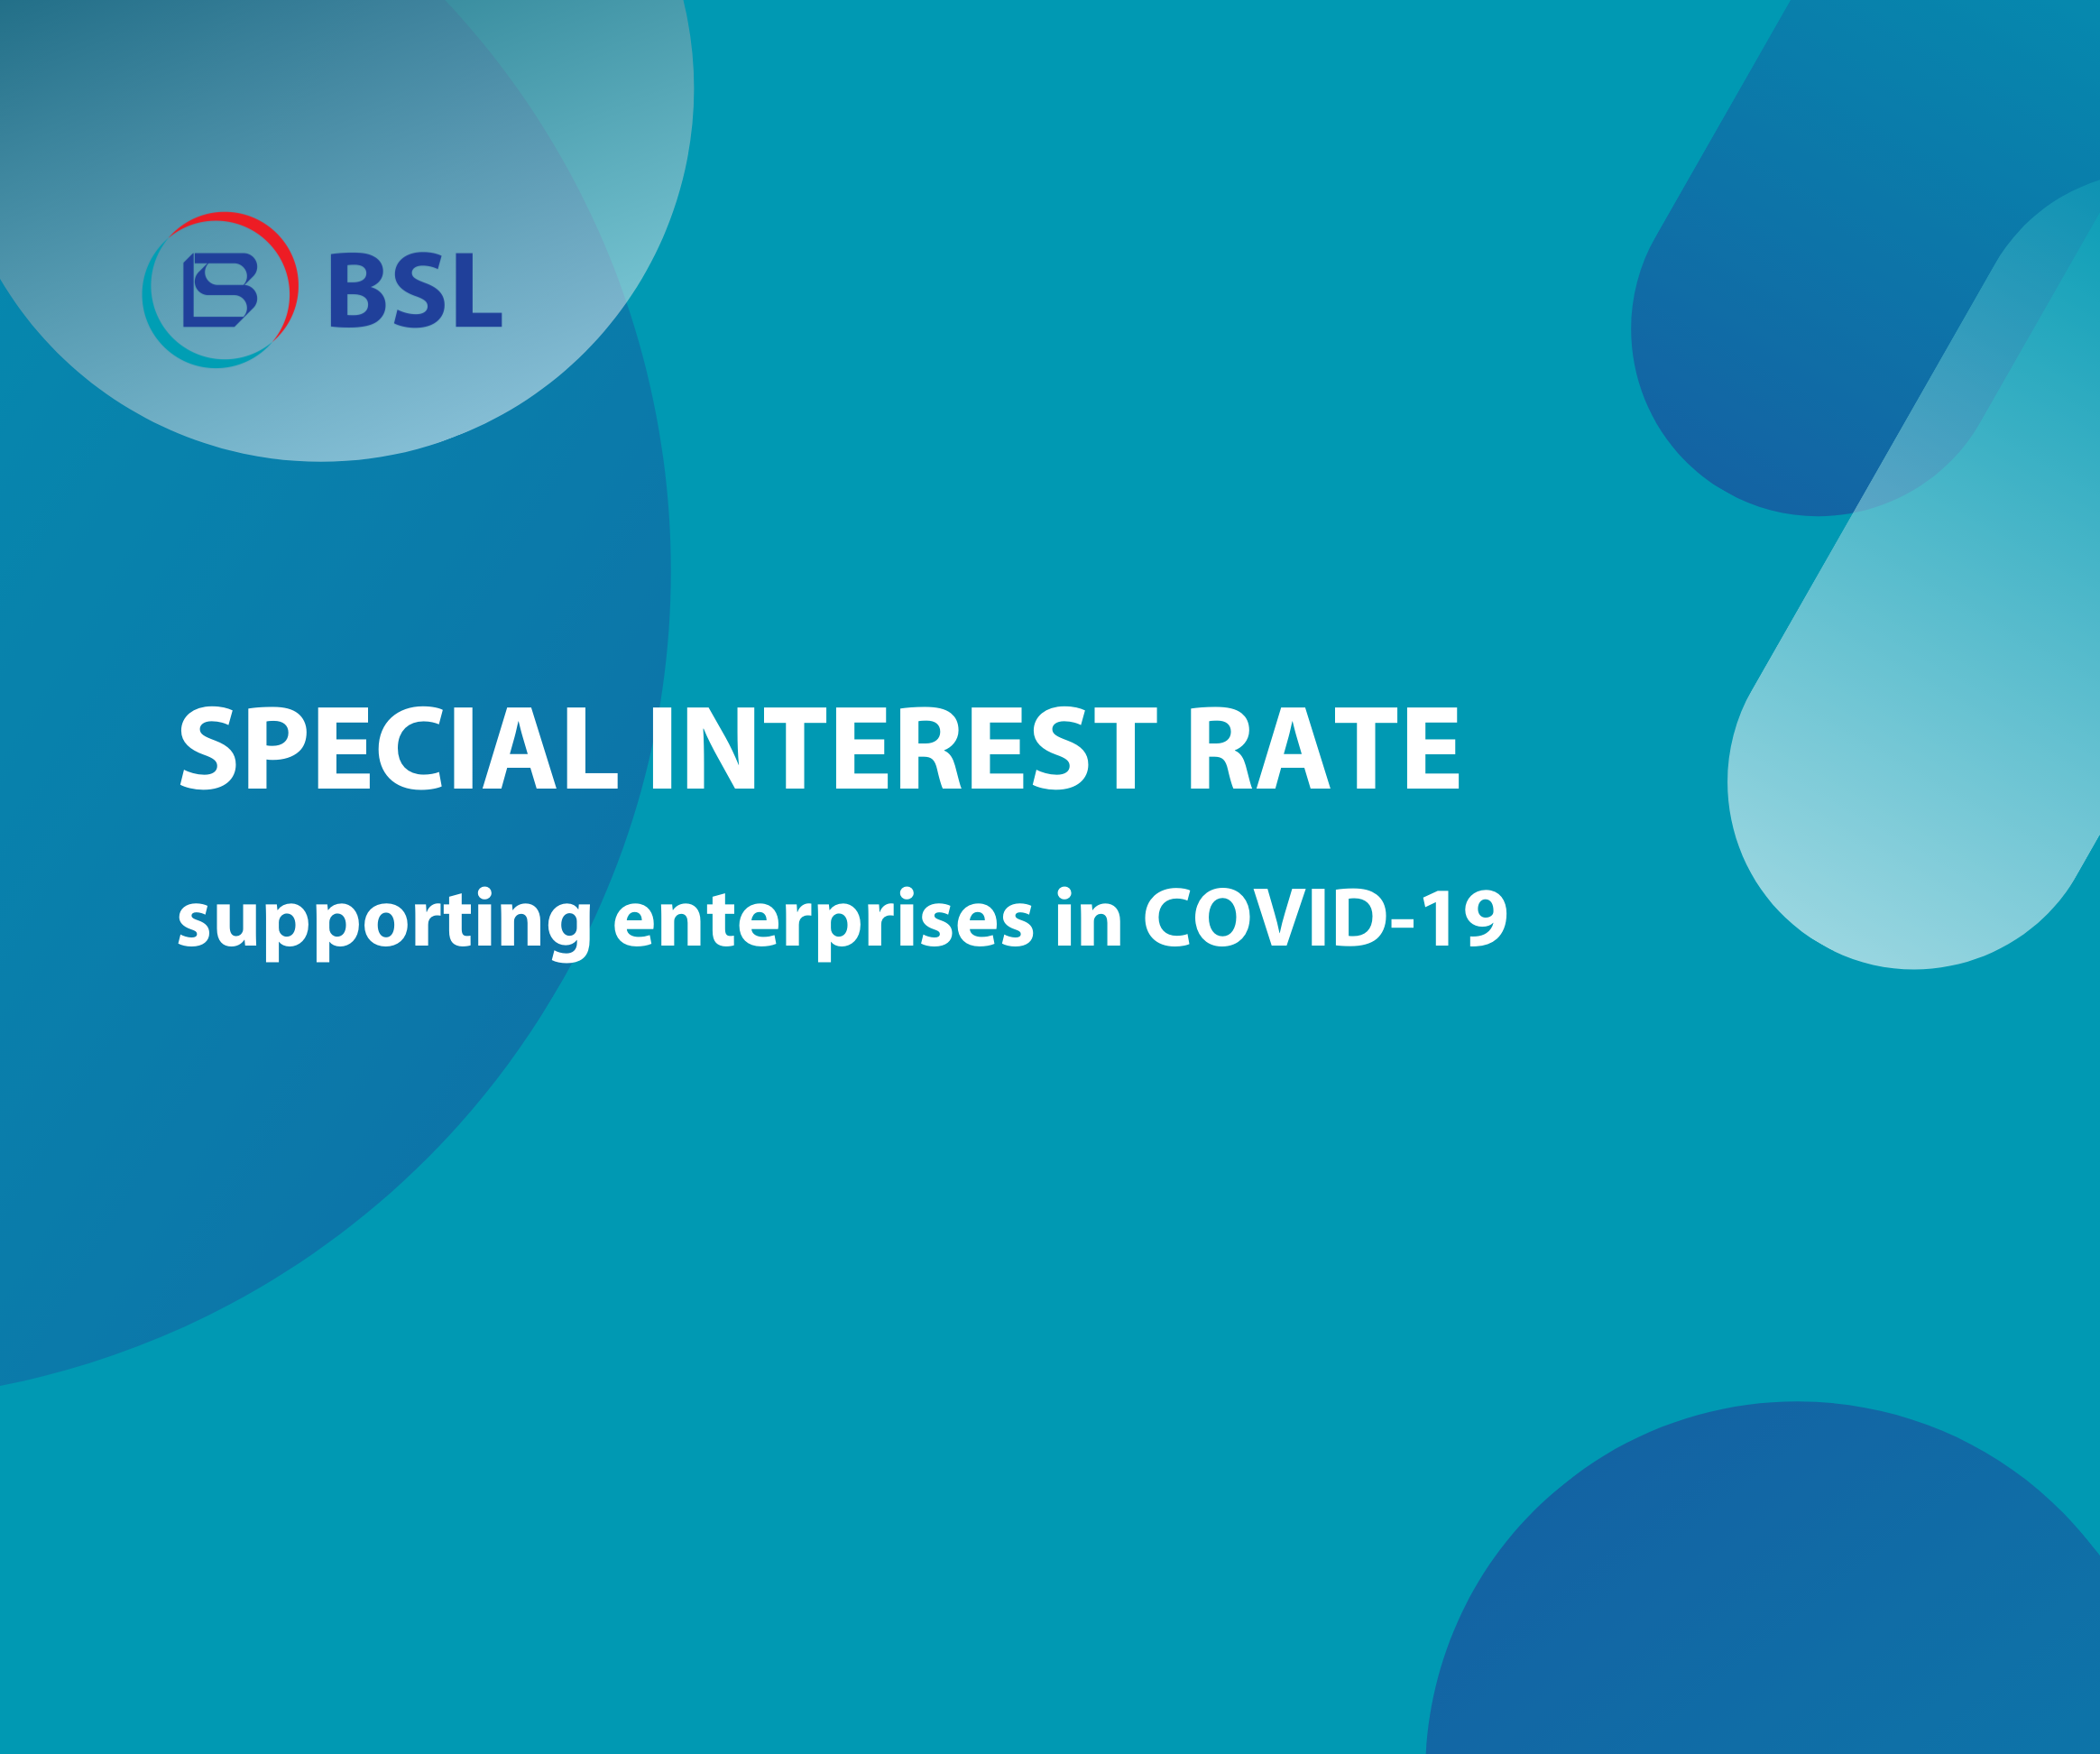 BSL offers special interest rate, supporting enterprises in COVID-19